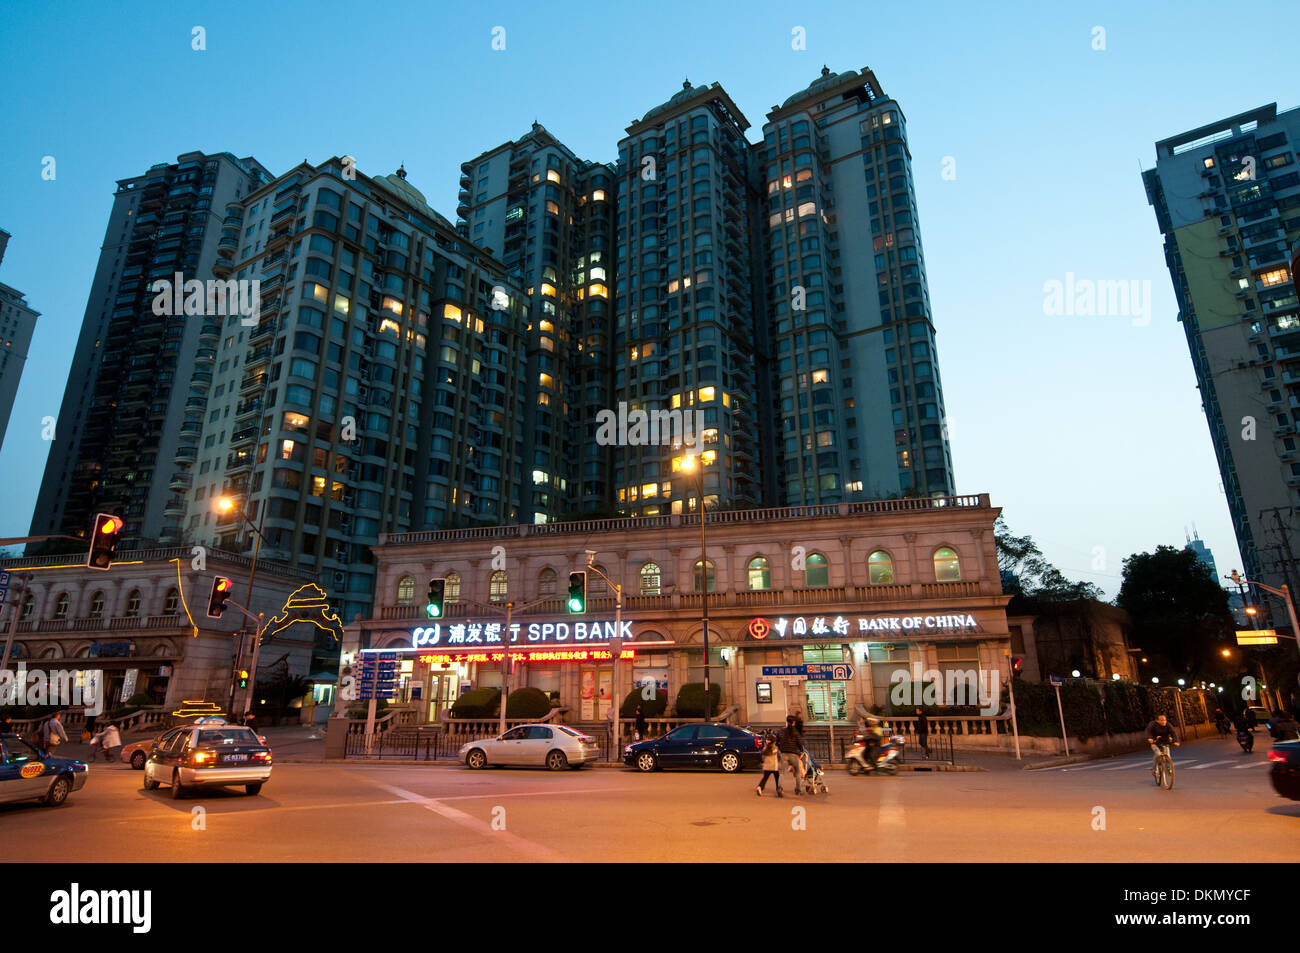 Huge apartment house at Henan South Road with SPD Bank and Bank of China offices, Huangpu District, Shanghai, China Stock Photo